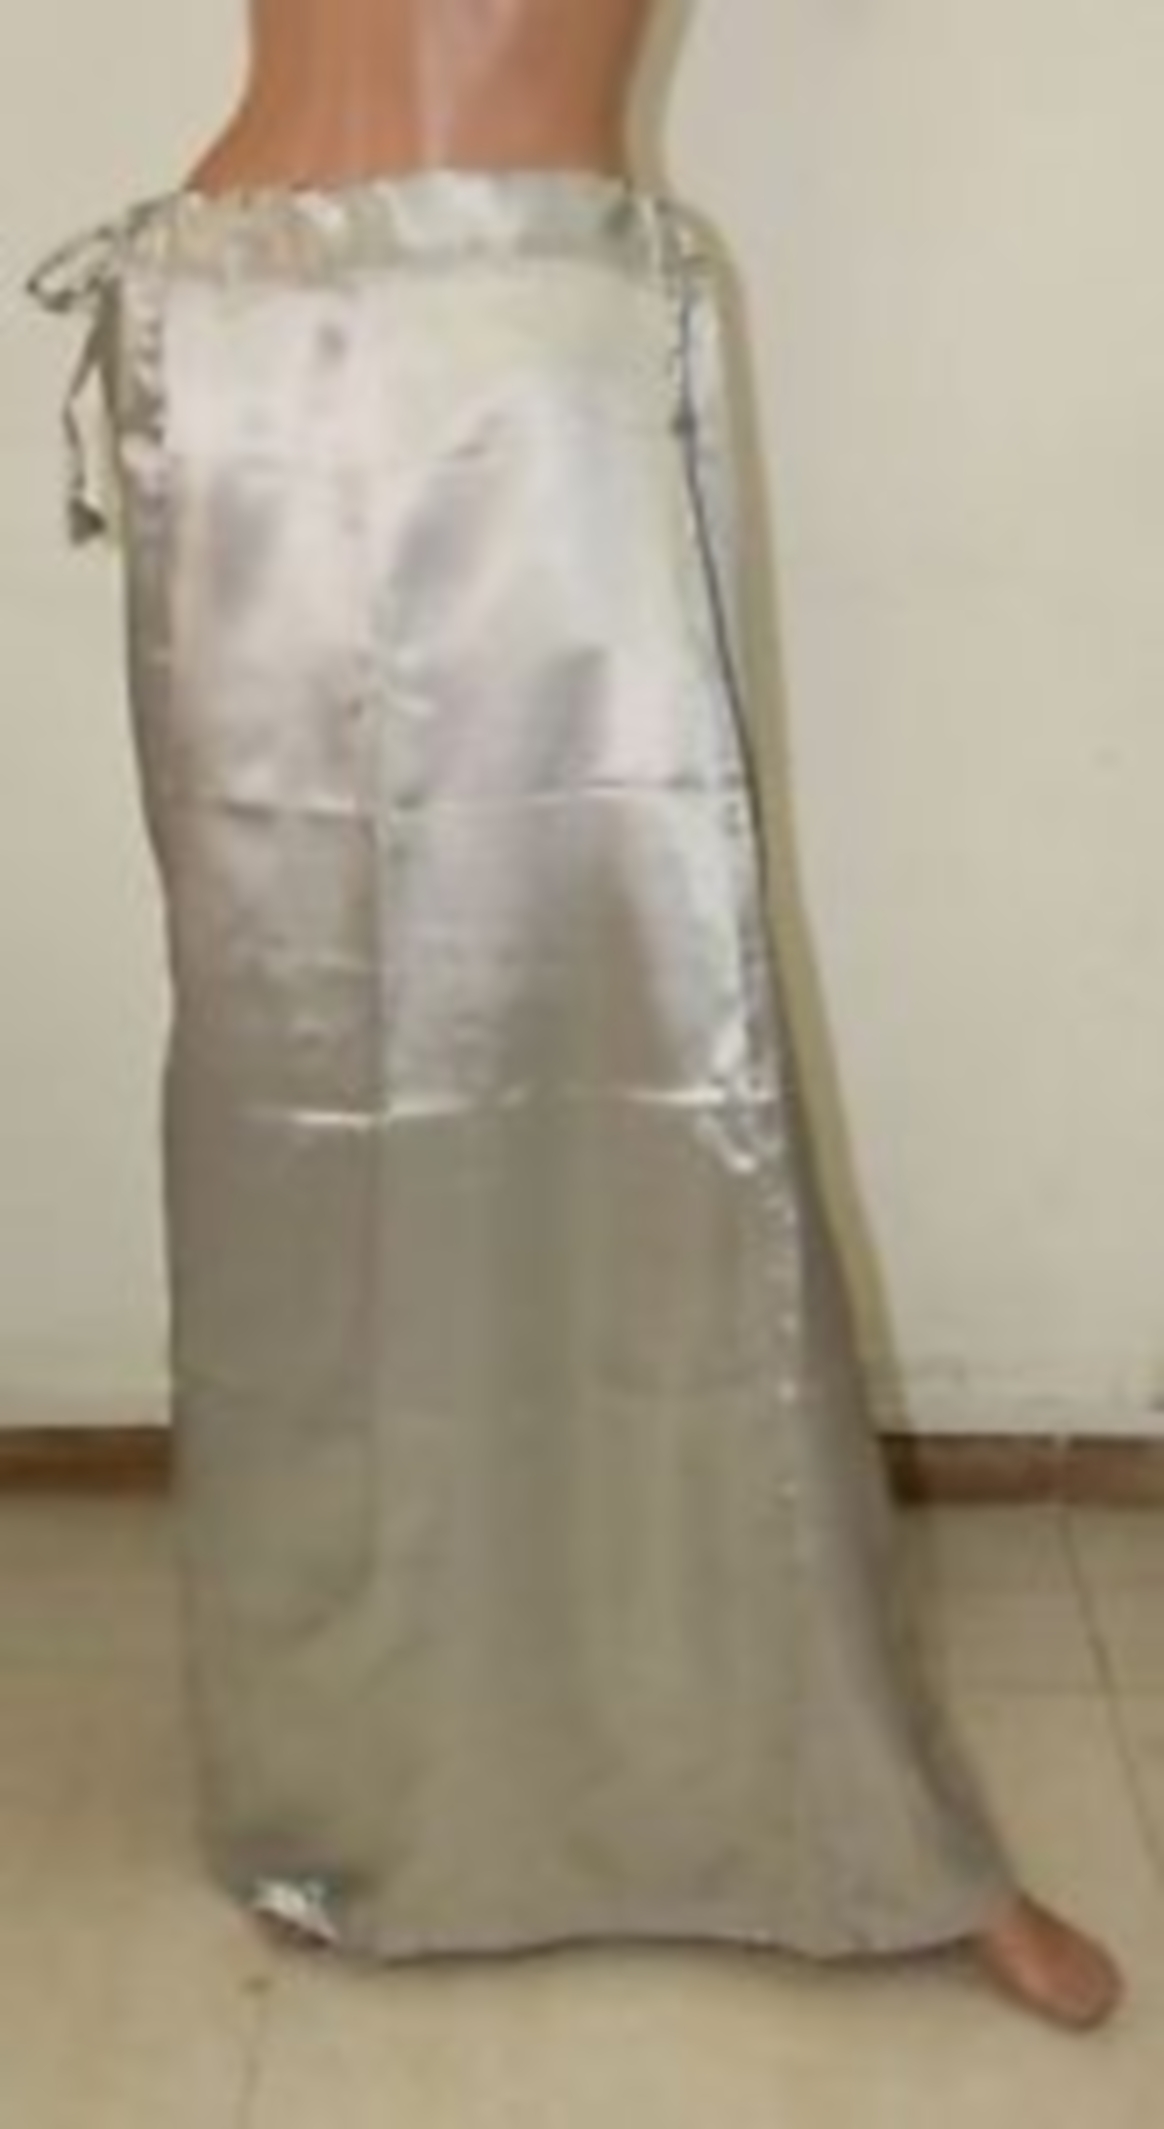 Satin Saree Petticoat / Under Skirt Large Size in Assorted Color #20979